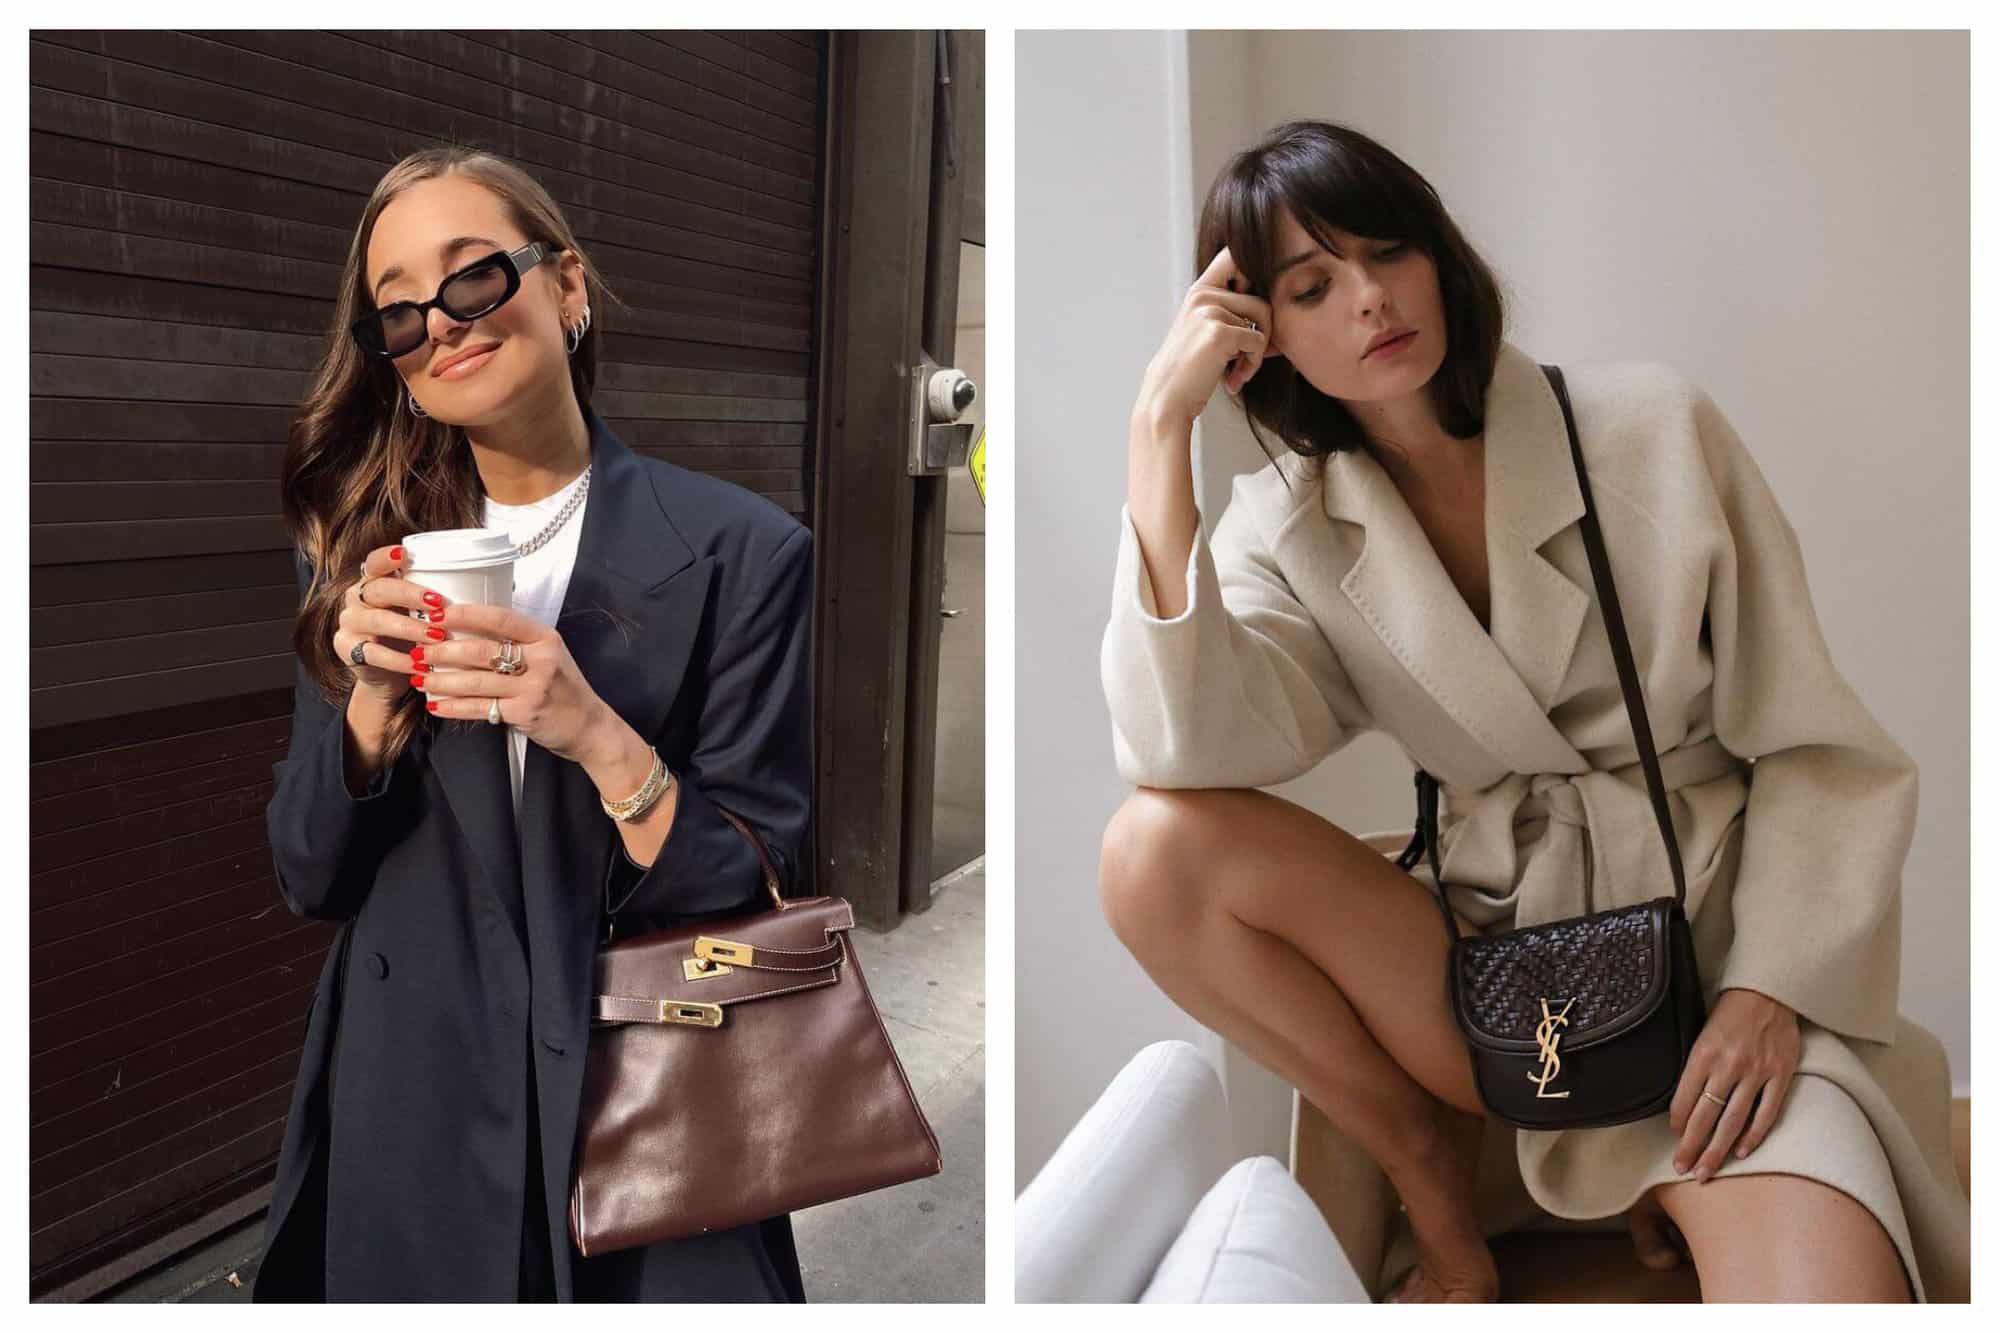 Left: Fashion designer Danielle Bernstein is enjoying a cup of coffee in her hand while having her brown Hermès Kelly bag strapped on her left forearm. She is wearing a pair of black sunnies, an oversized navy blue blazer, and a white shirt. Right: Fashion blogger Annabelle Belmondo is striking a pose with her nude colored coat and a small black YSL purse worn across her torso. 